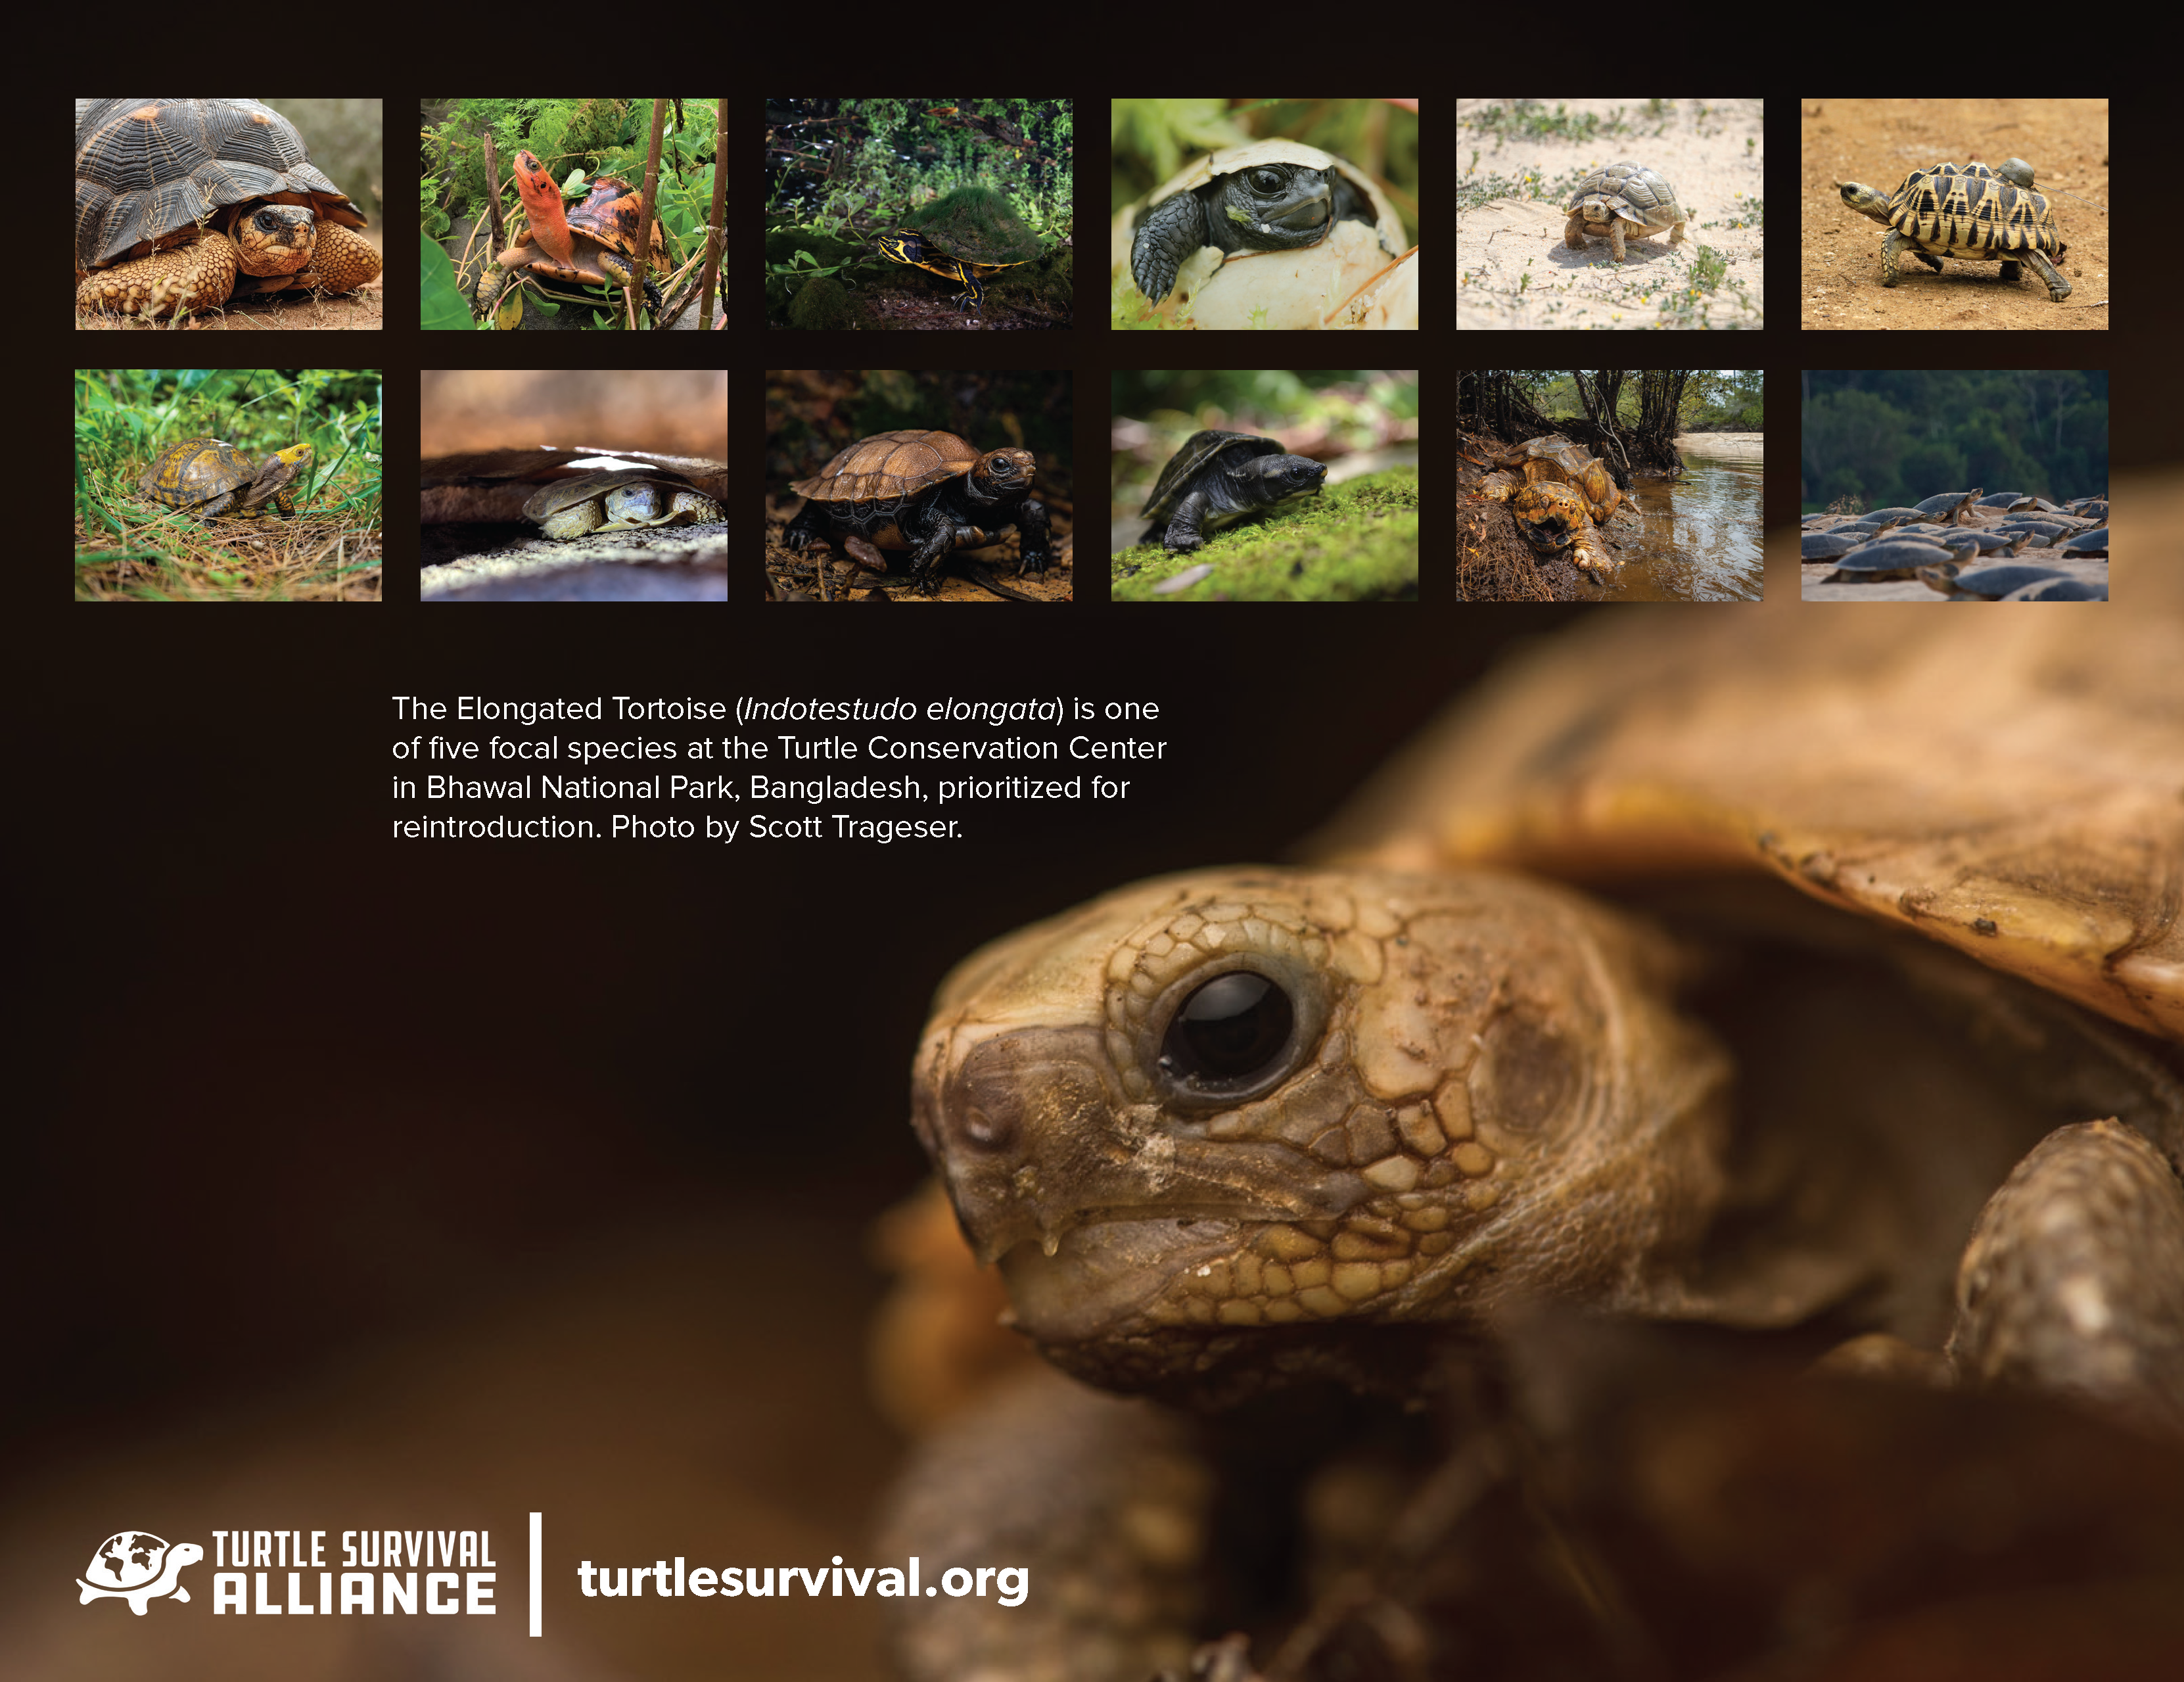 2024 Calendar - Celebrating 20 Years of Turtle Conservation